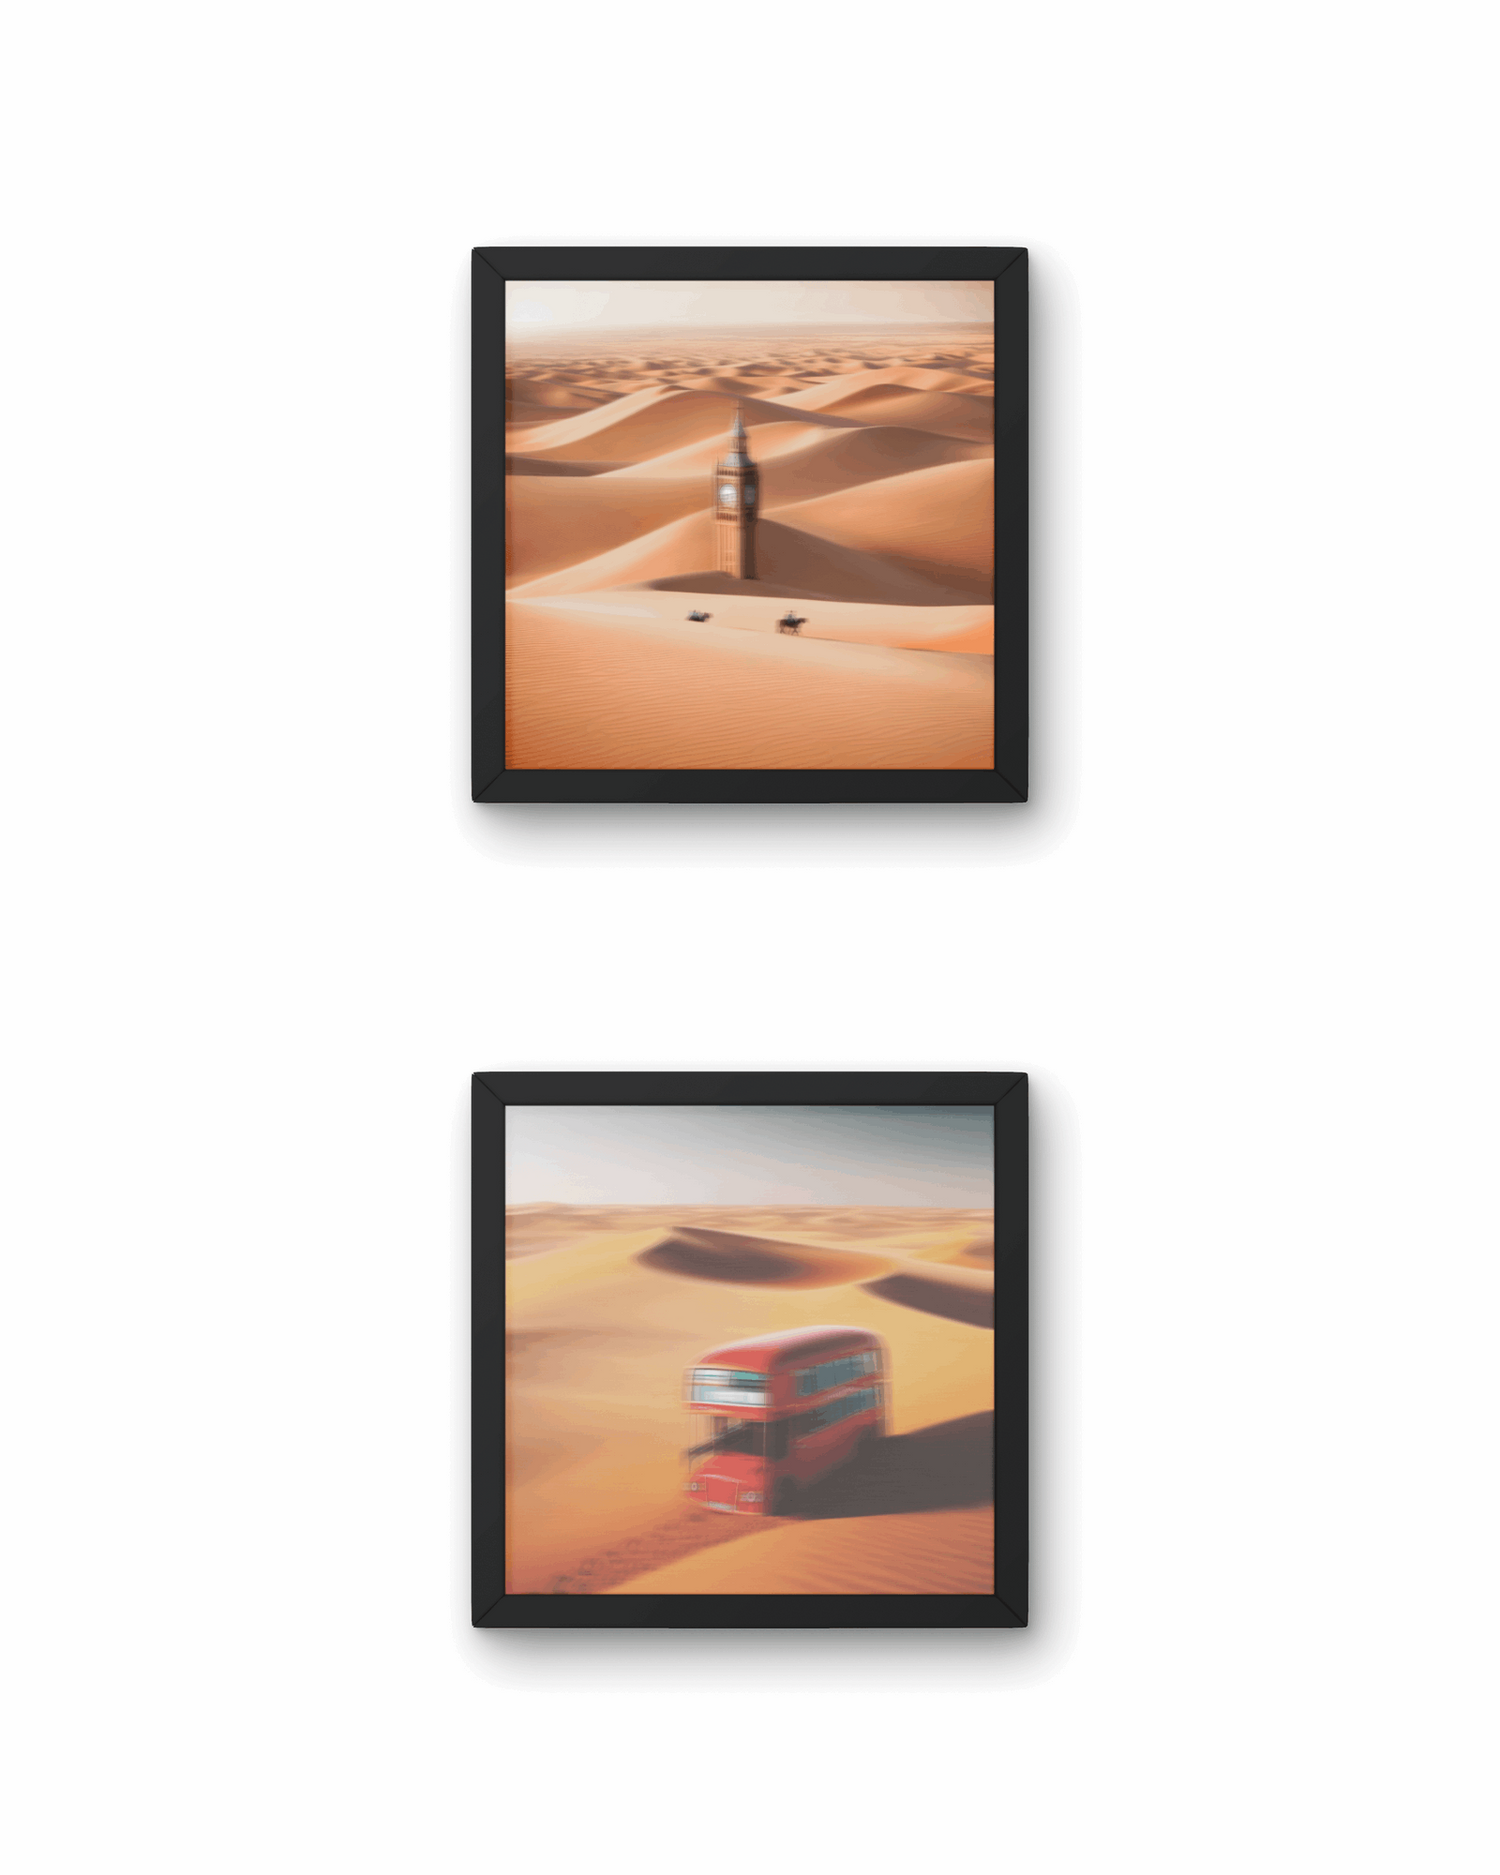 Desert Mirages: London at The Empty Quarter (A Set of 3)